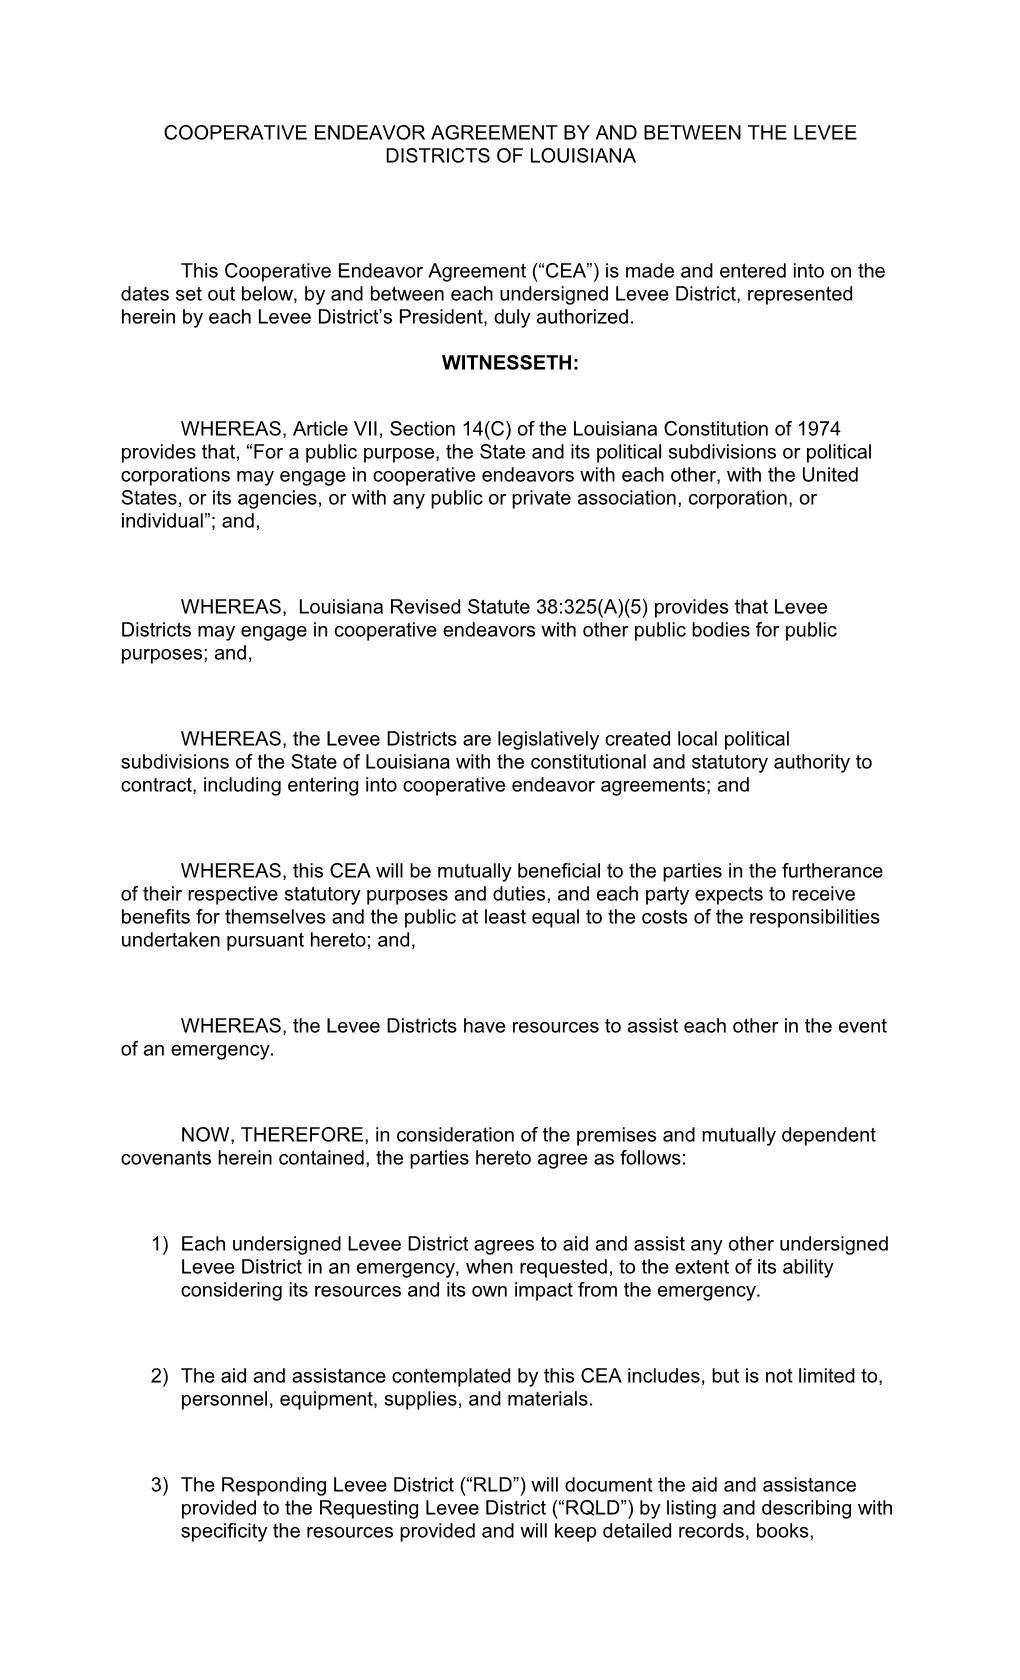 Cooperative Endeavor Agreement by and Between the Levee Districts of Louisiana